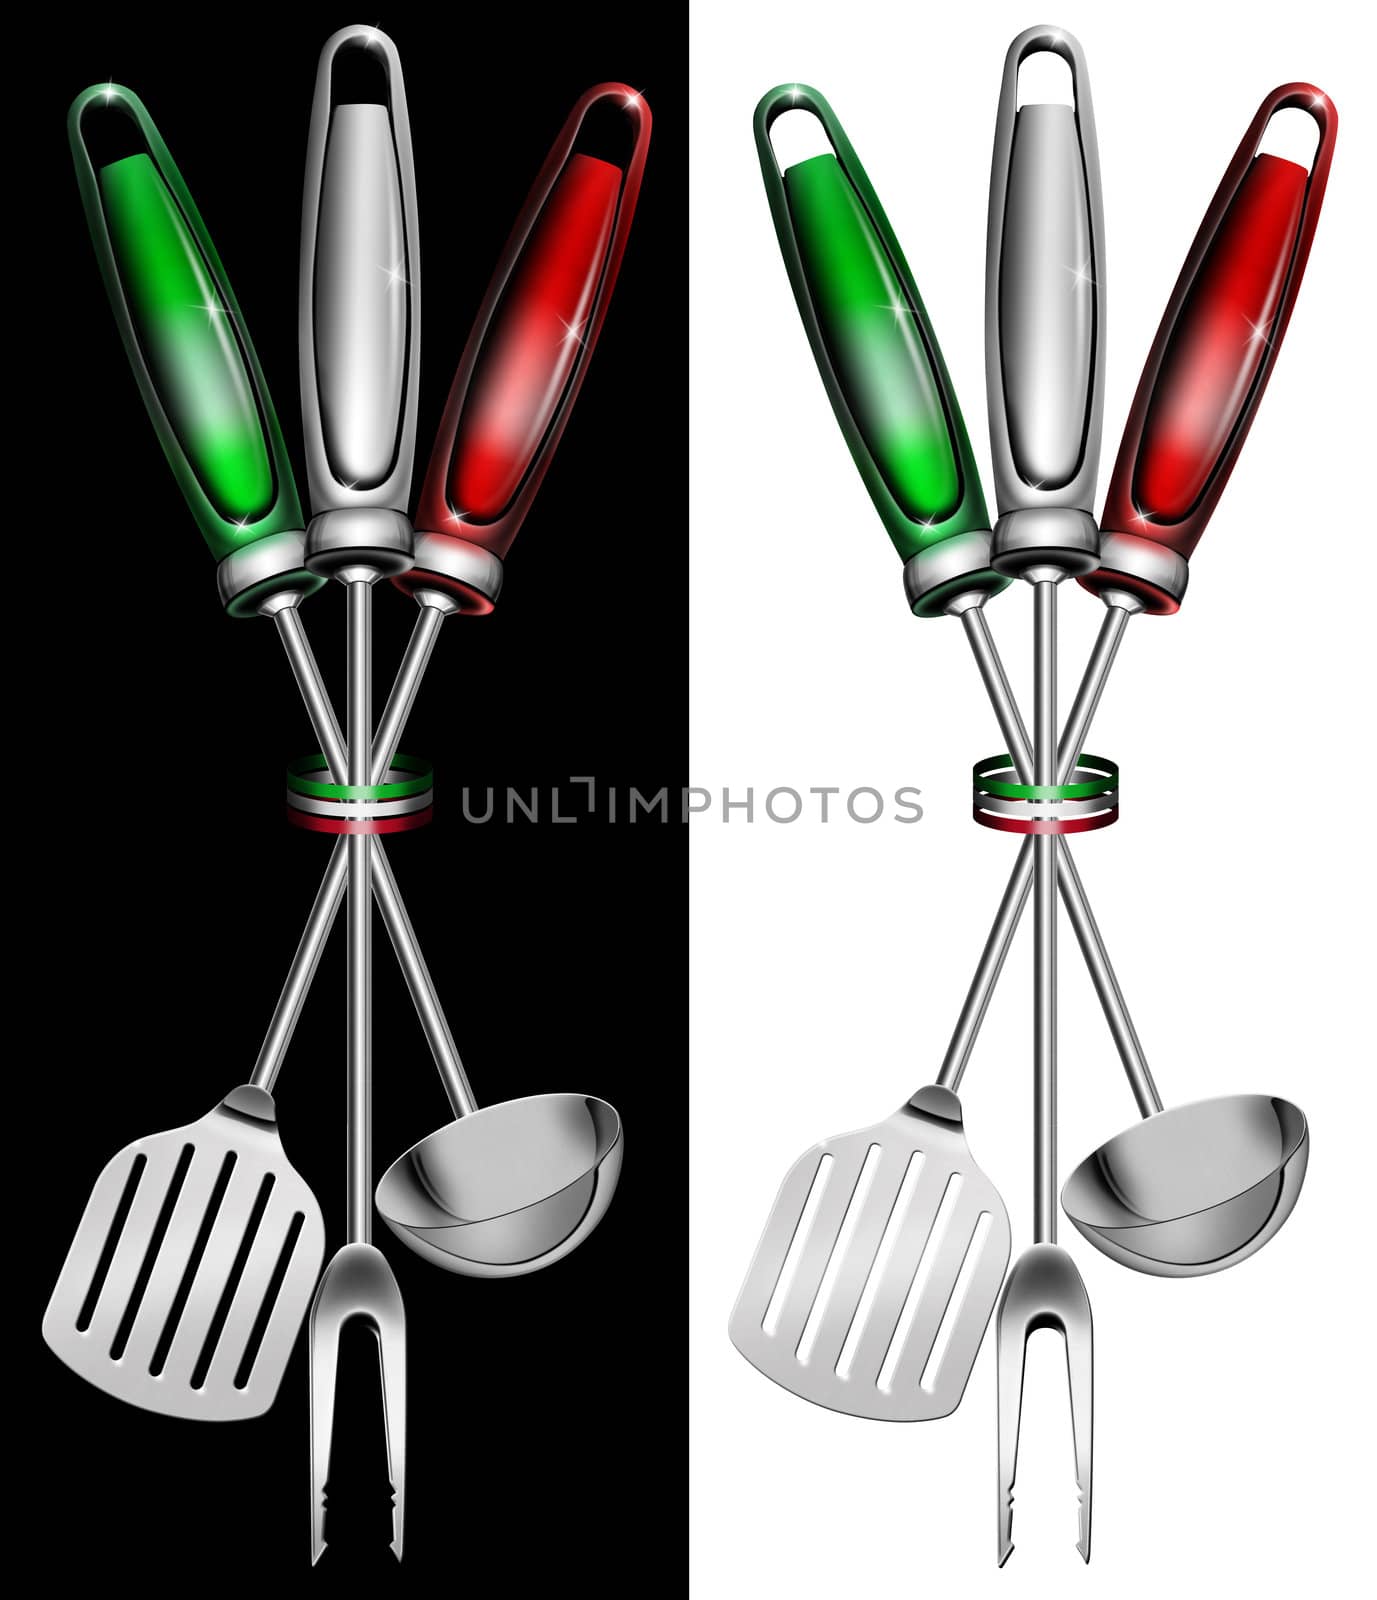 Concept of Italian cuisine with kitchen tools and national flag